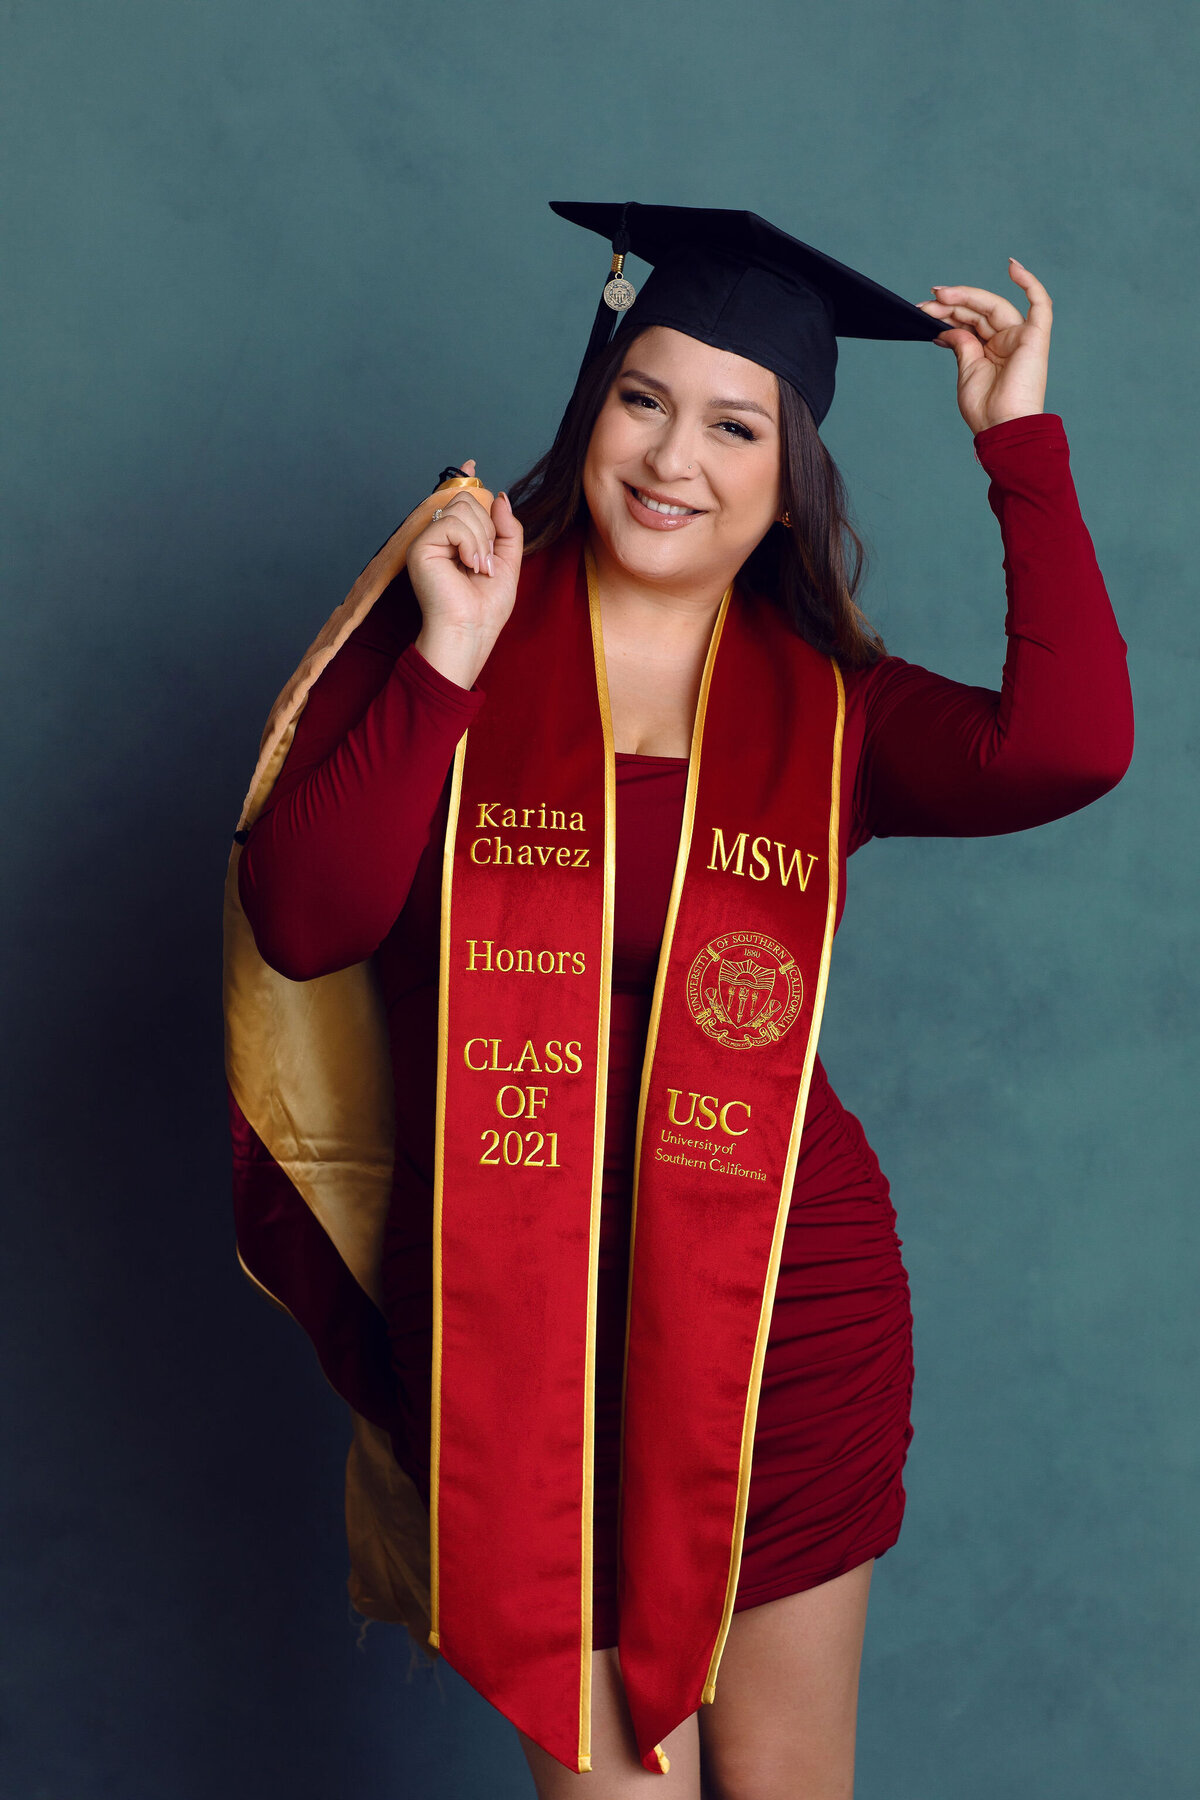 Graduation Portrait Of Young Woman In Red Dress Los Angeles